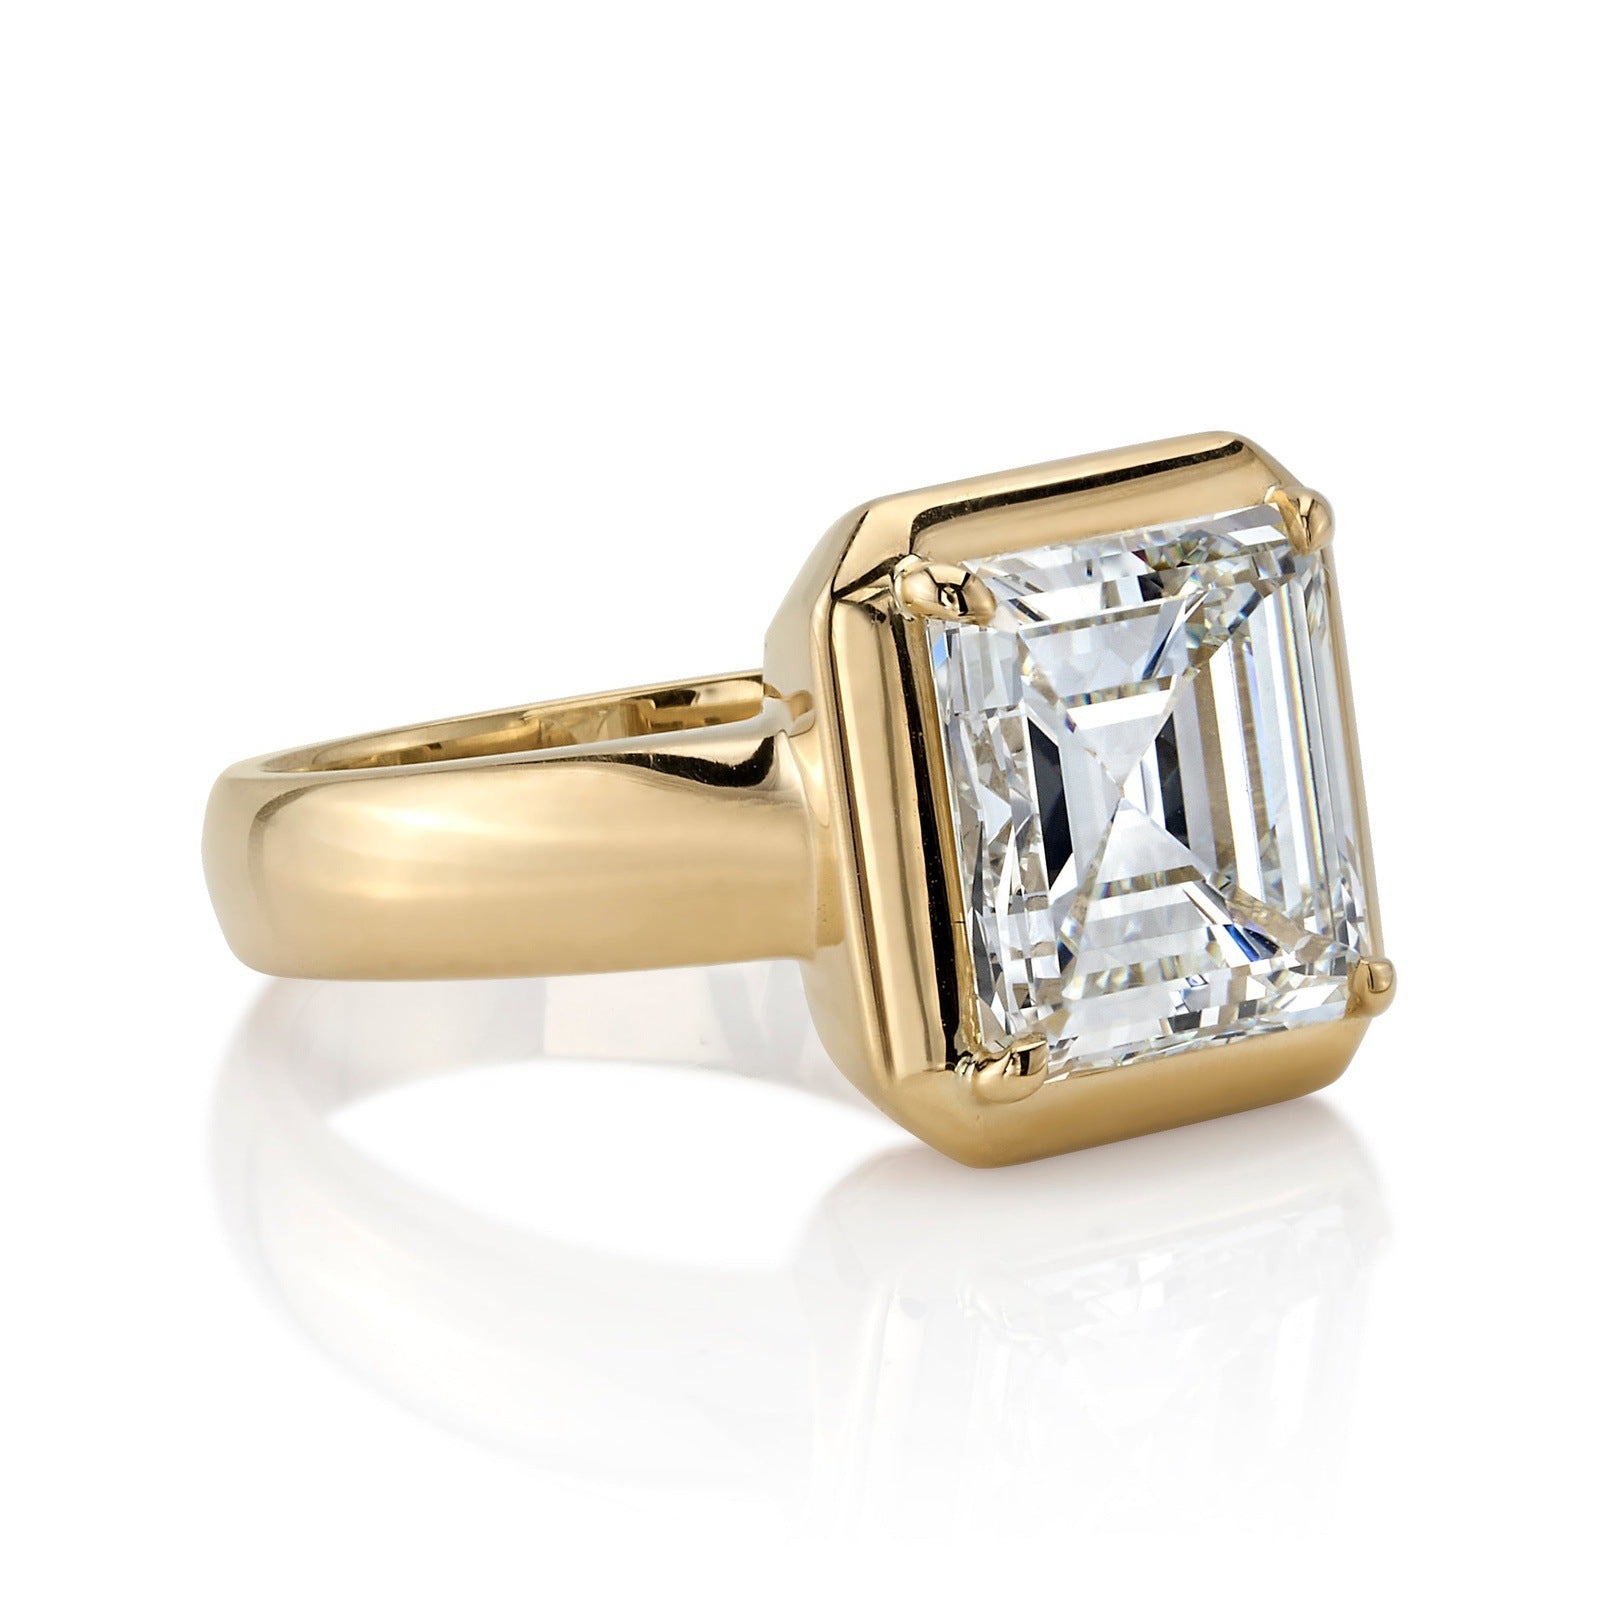 SINGLE STONE CORI RING featuring 4.51ct K/VVS2 GIA certified Asshcer cut diamond prong set in a handcrafted 18K yellow gold mounting.